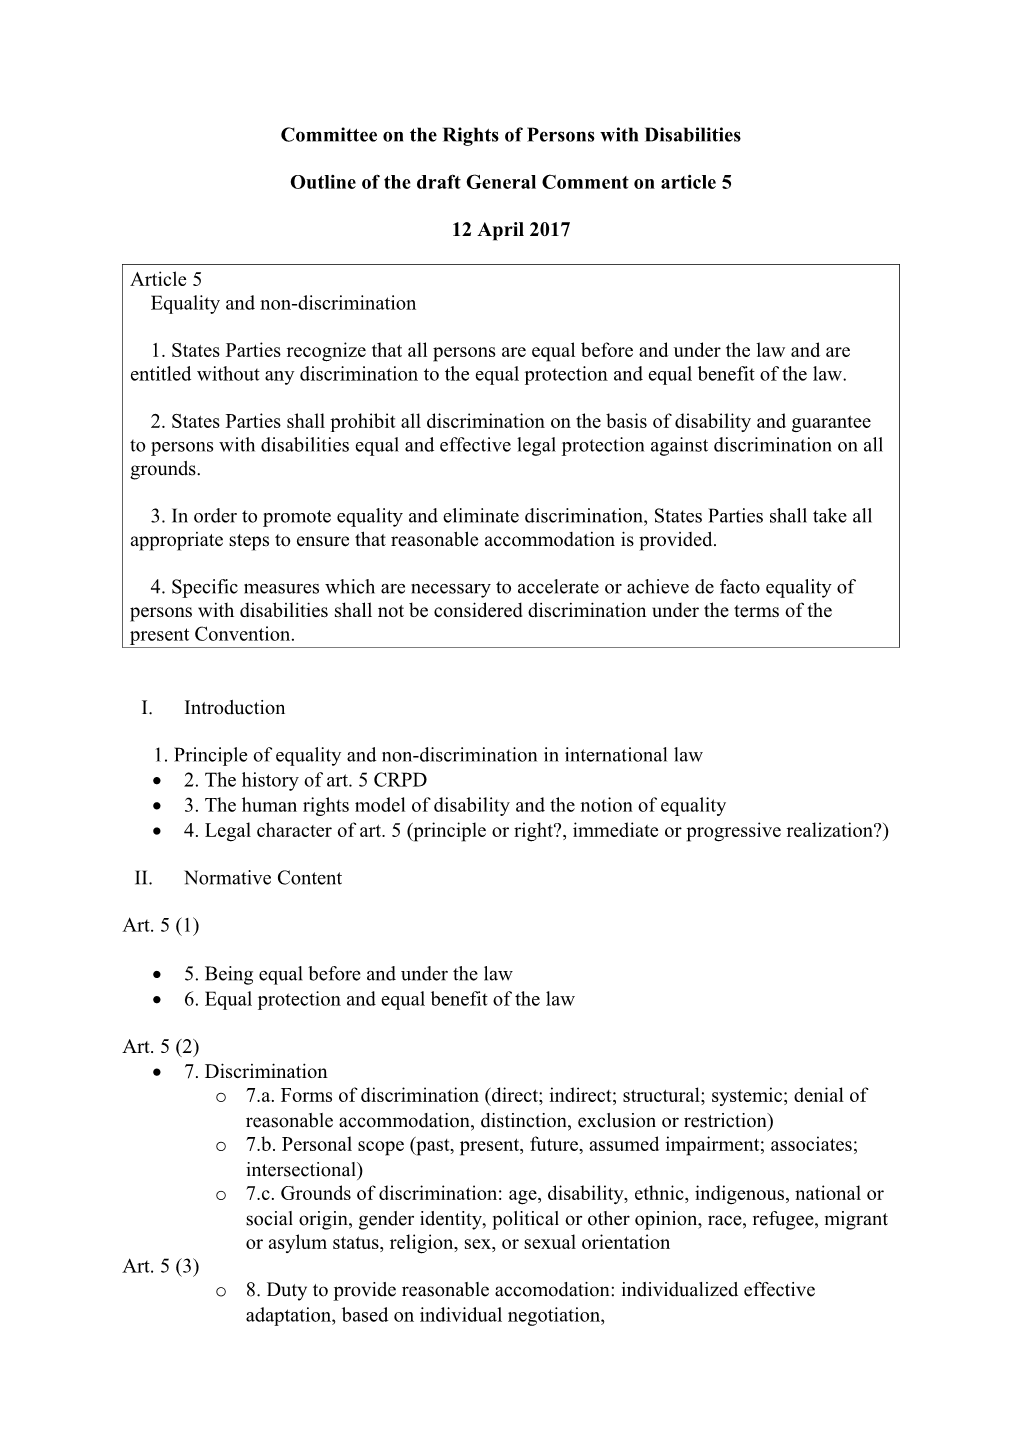 Final Outline GC Article5and Non Discrimination